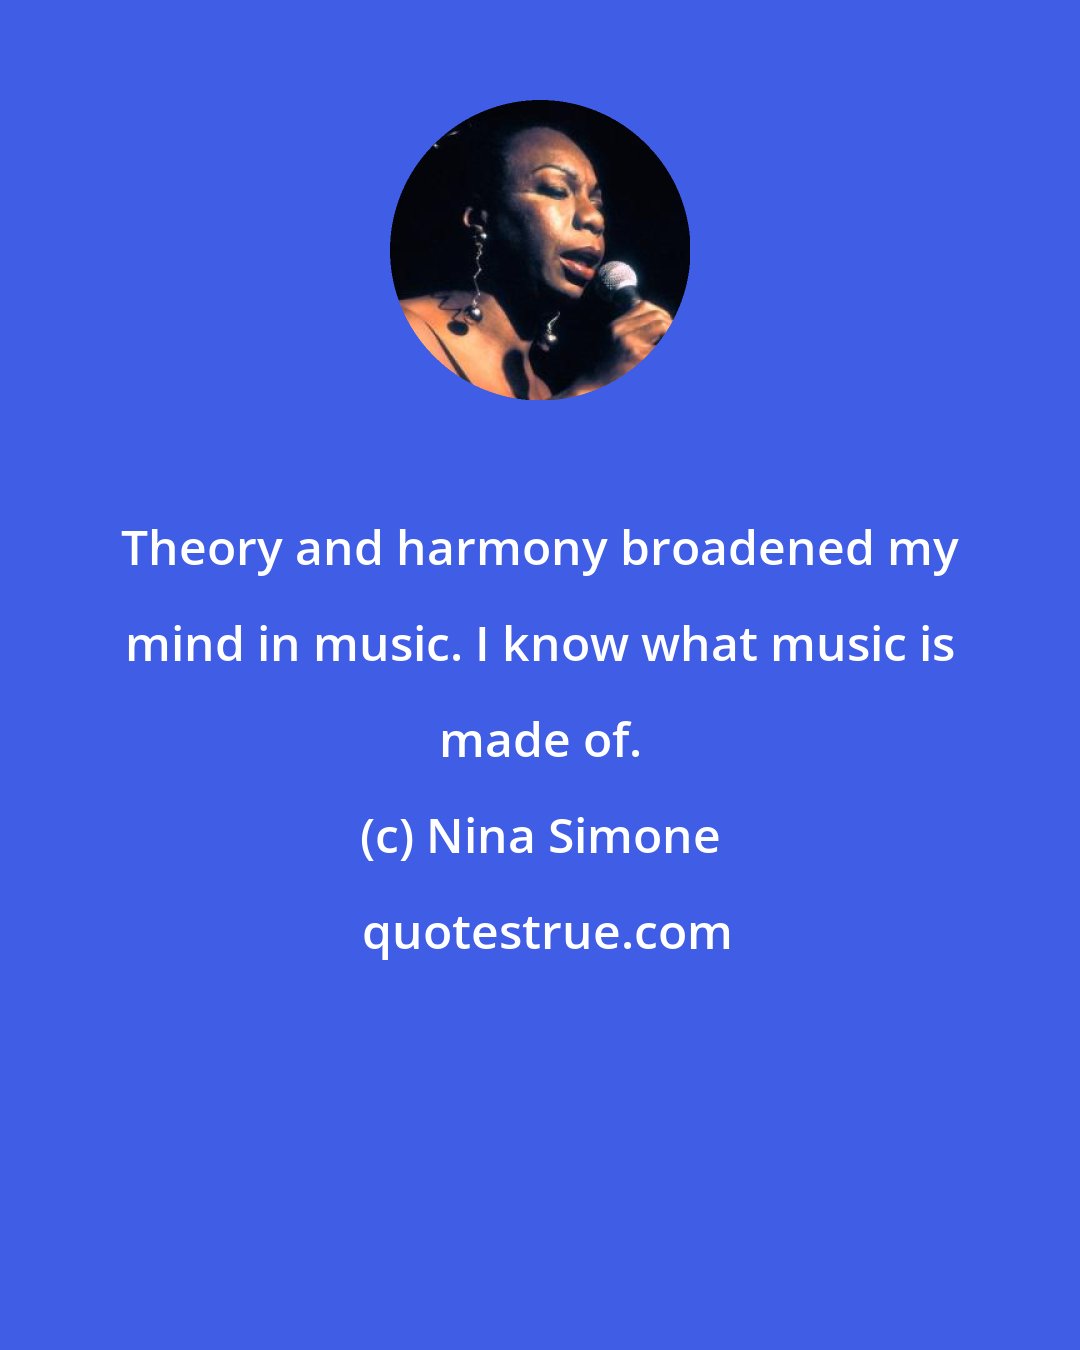 Nina Simone: Theory and harmony broadened my mind in music. I know what music is made of.